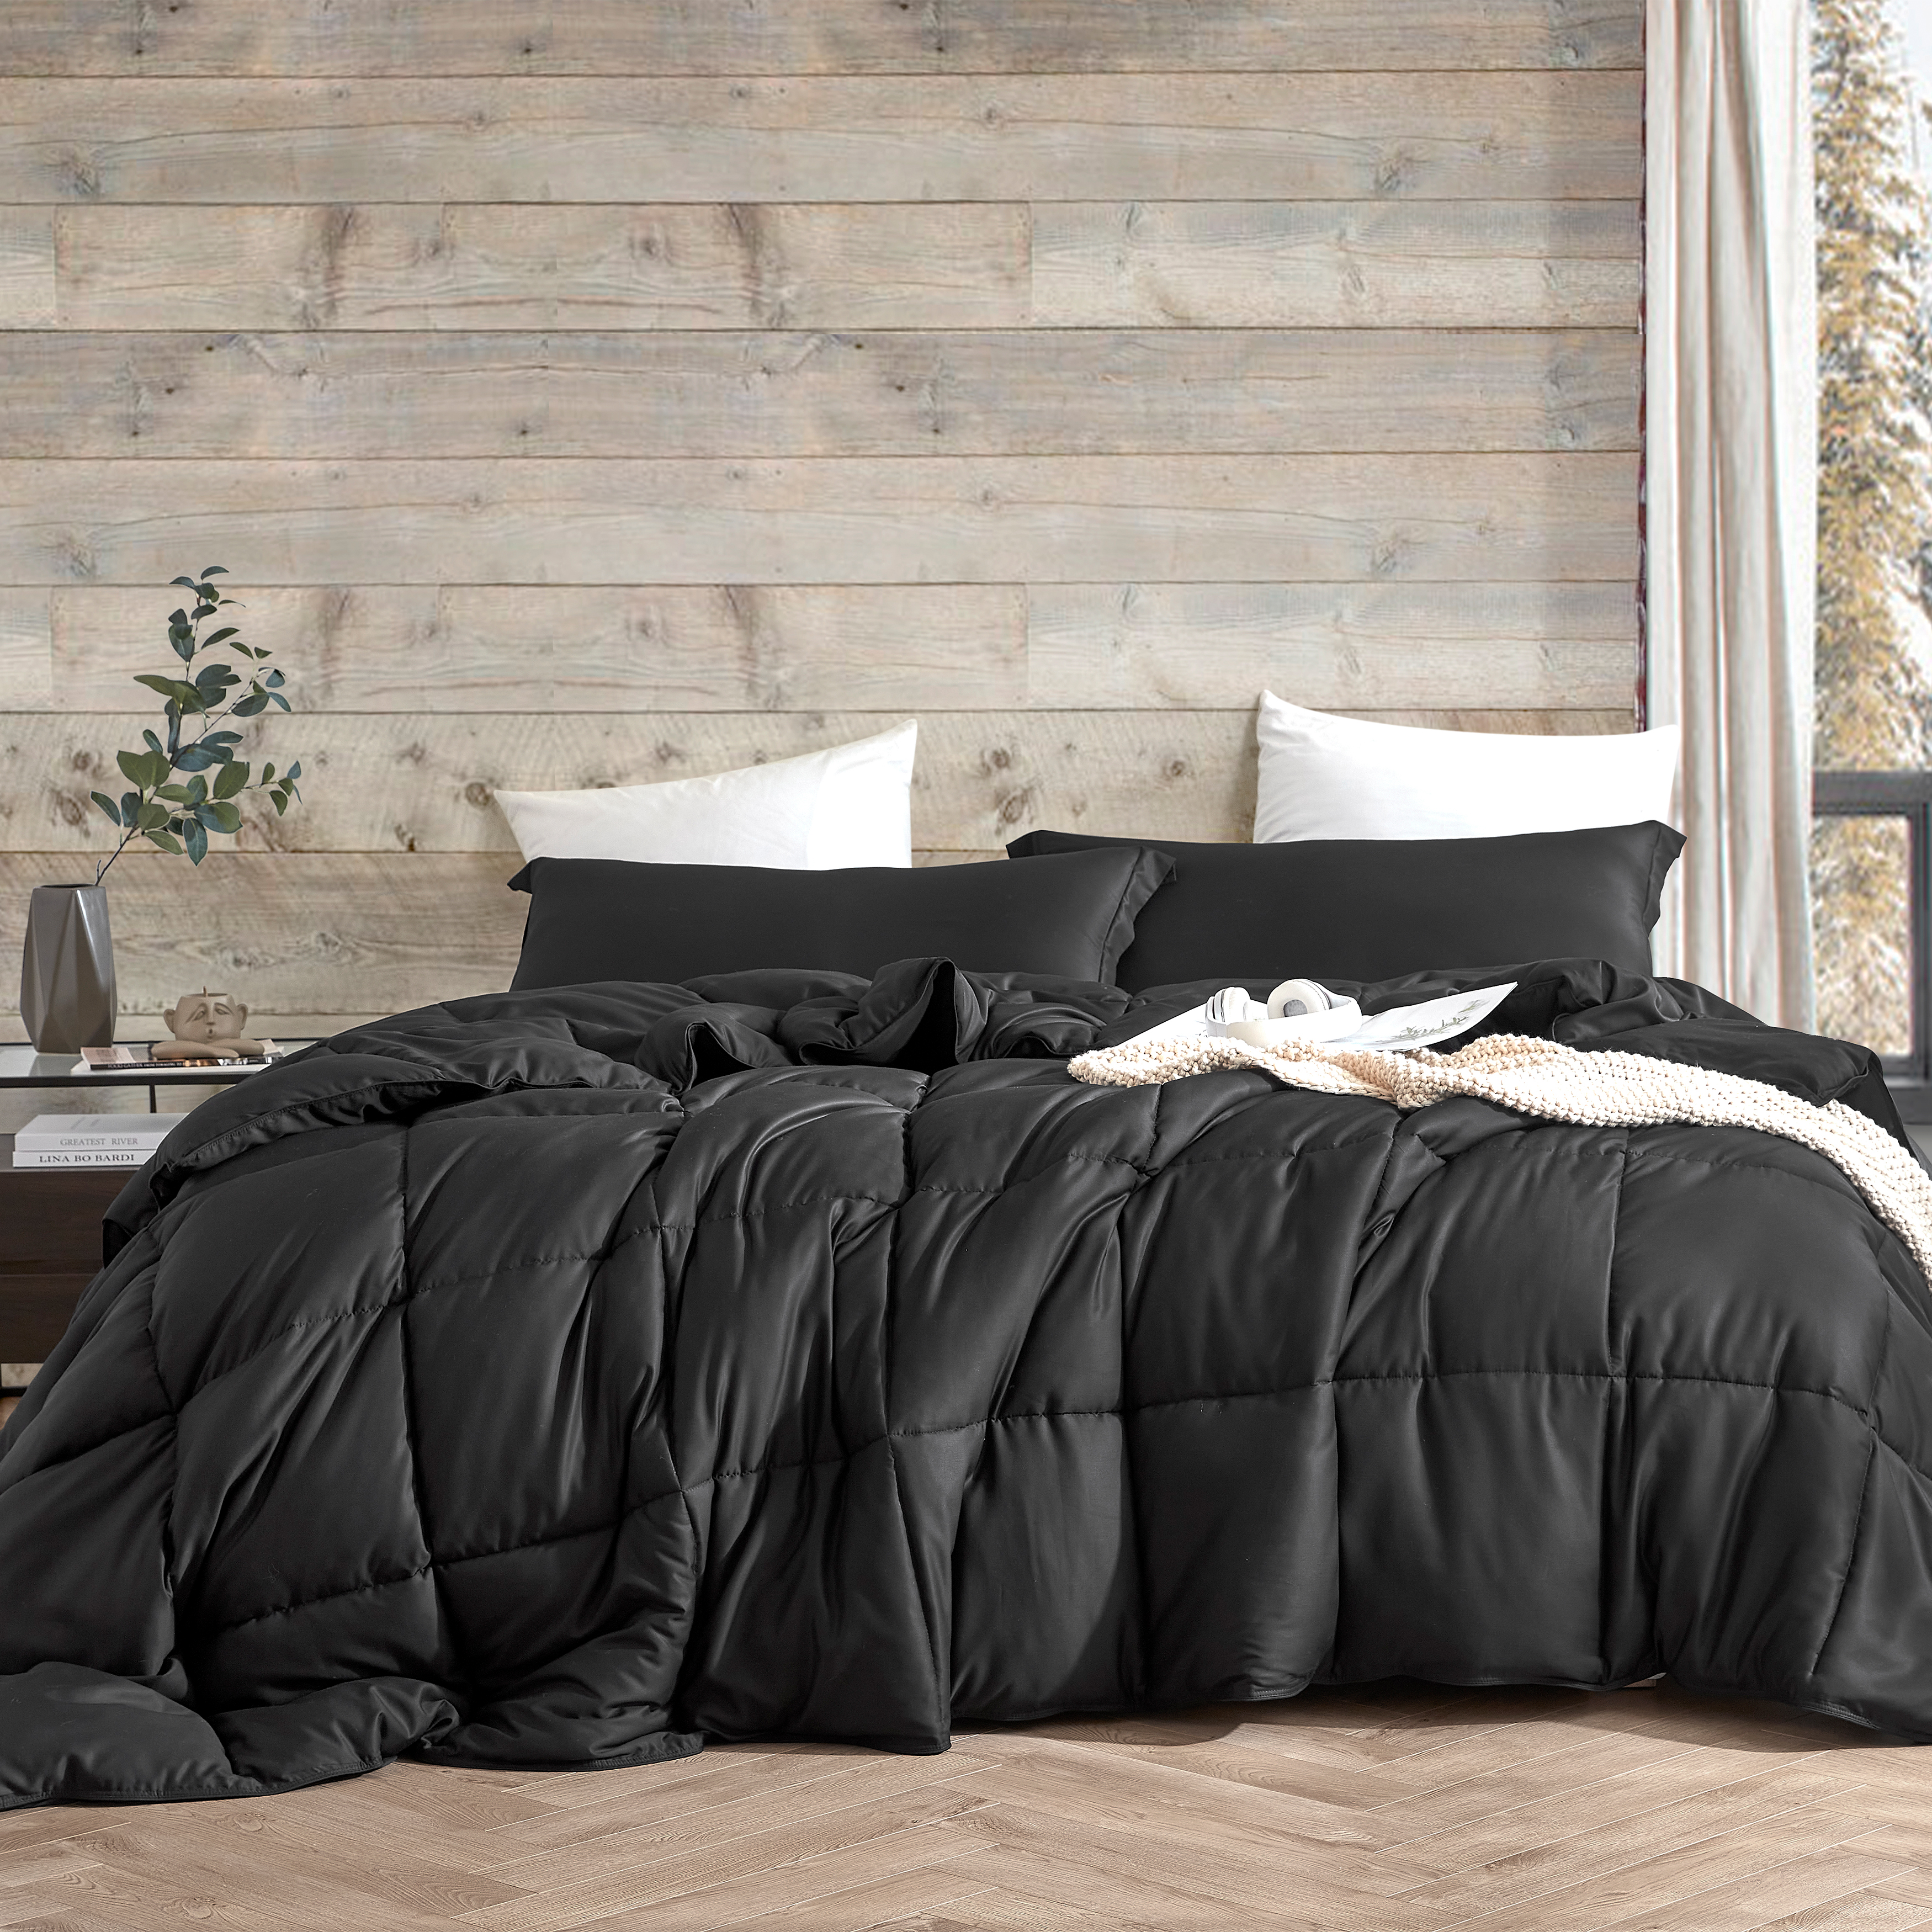 Breathable Bamboo Queen Bedding Set Made with Cooling Coma Inducer Bedding Material